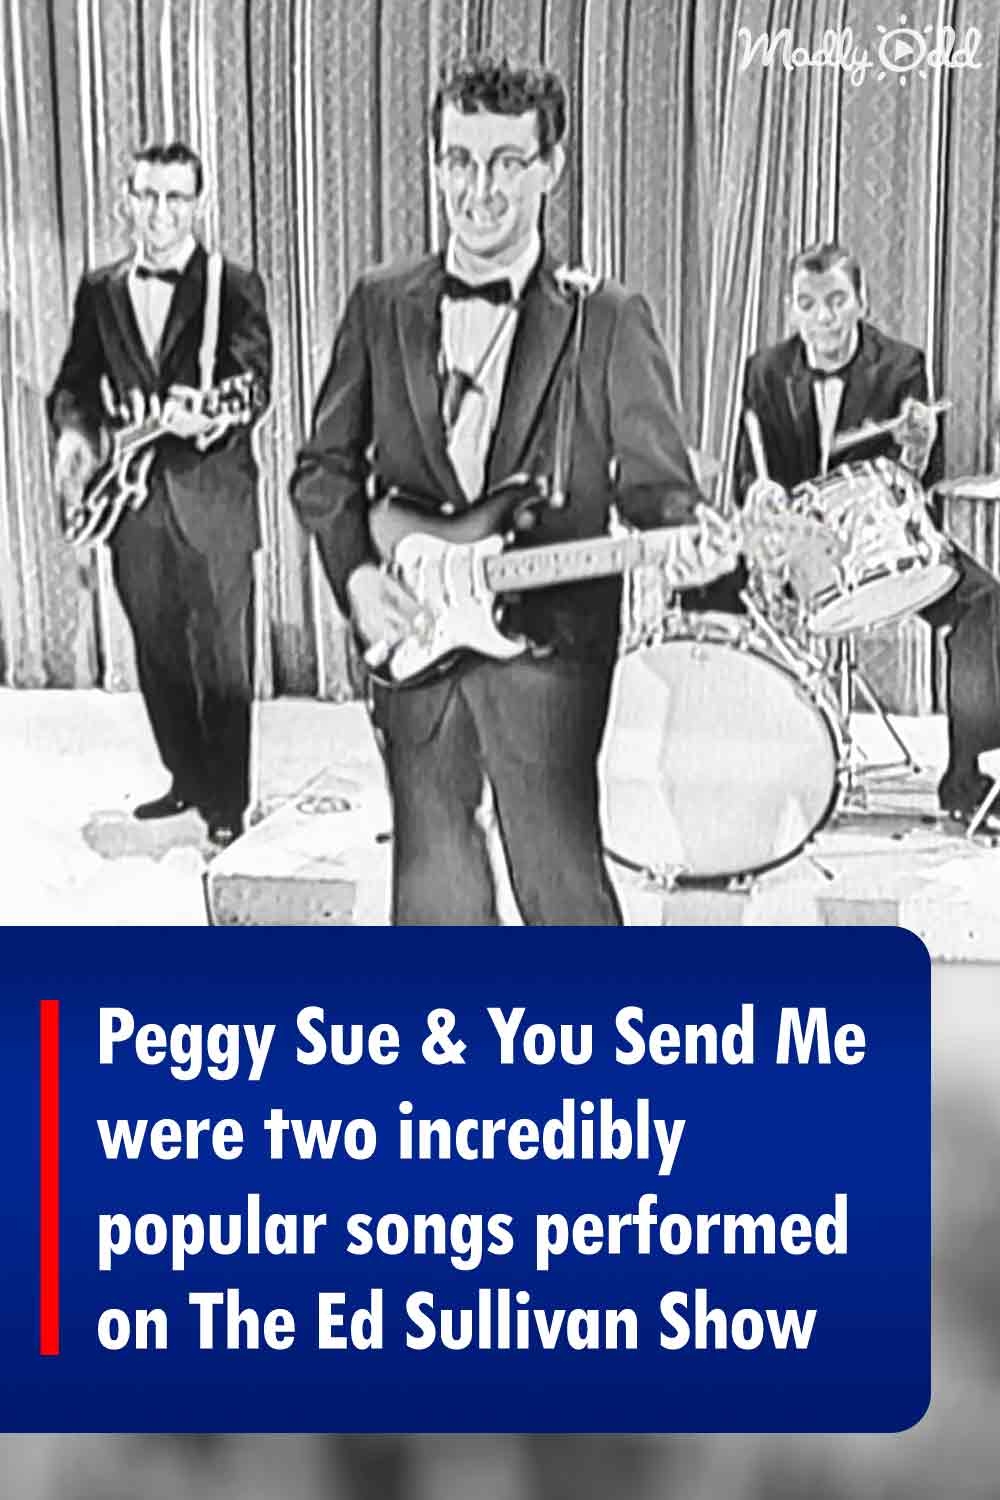 Peggy Sue & You Send Me were two incredibly popular songs performed on The Ed Sullivan Show